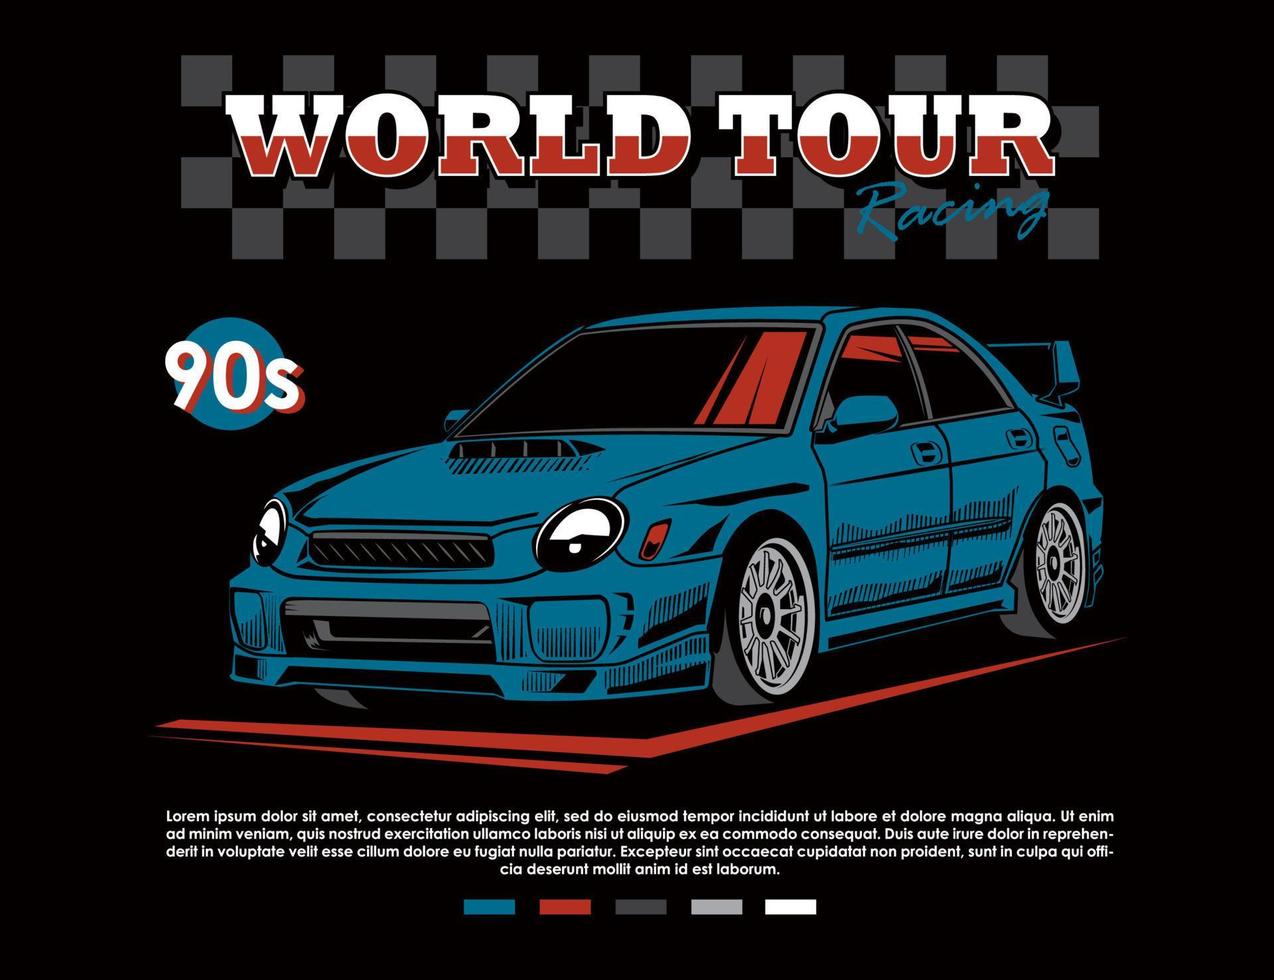 90s car vehicle illustration in vector graphic